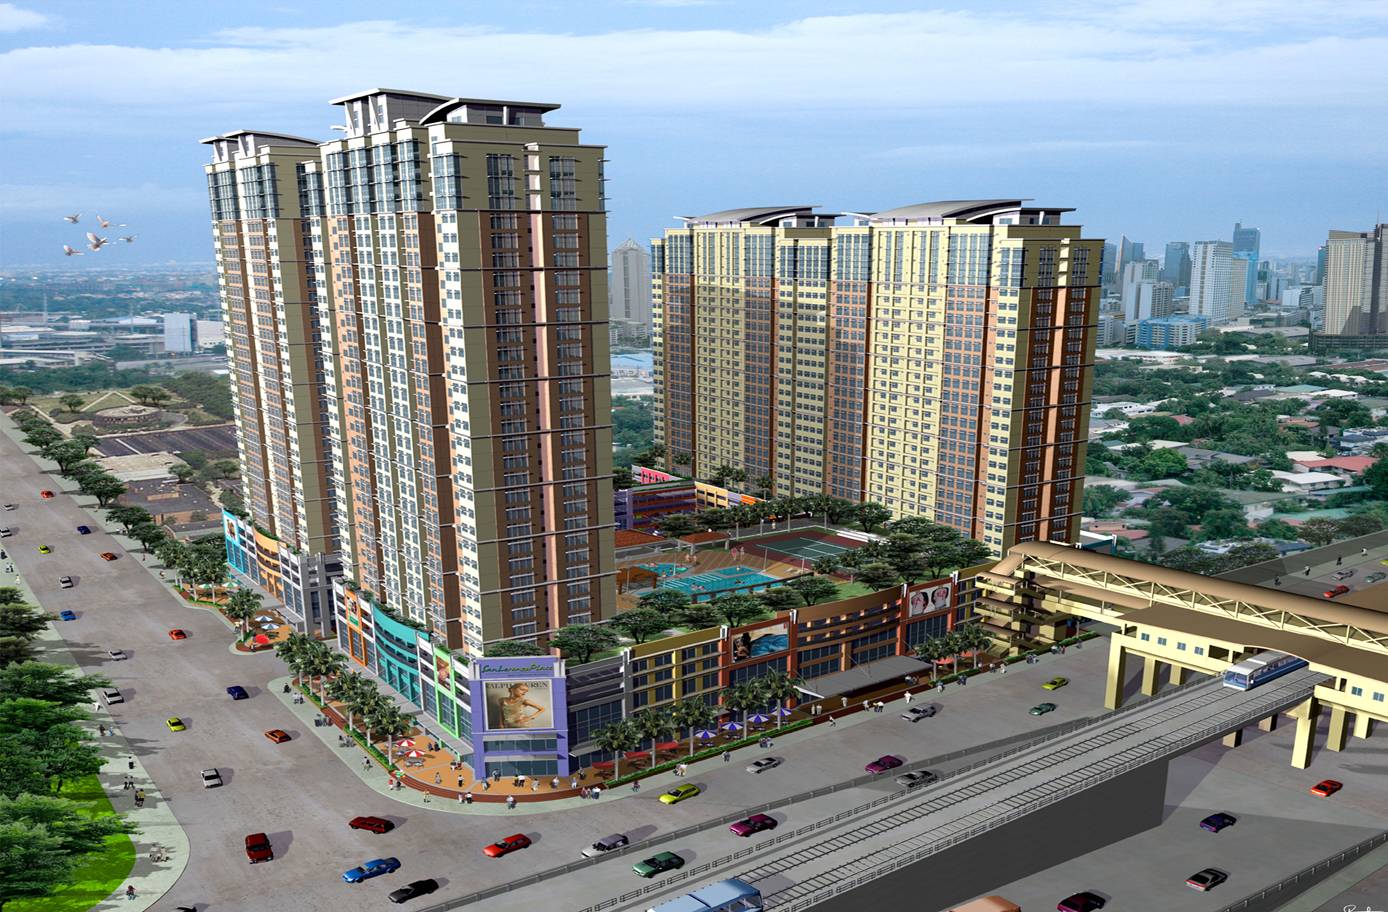 NO-DOWNPAYMENT CONDO UNIT ALONG PASONG TAMO (CHINO ROCES AVE.) -PHILIPPINES FOR AS LOW P10,800/MO.